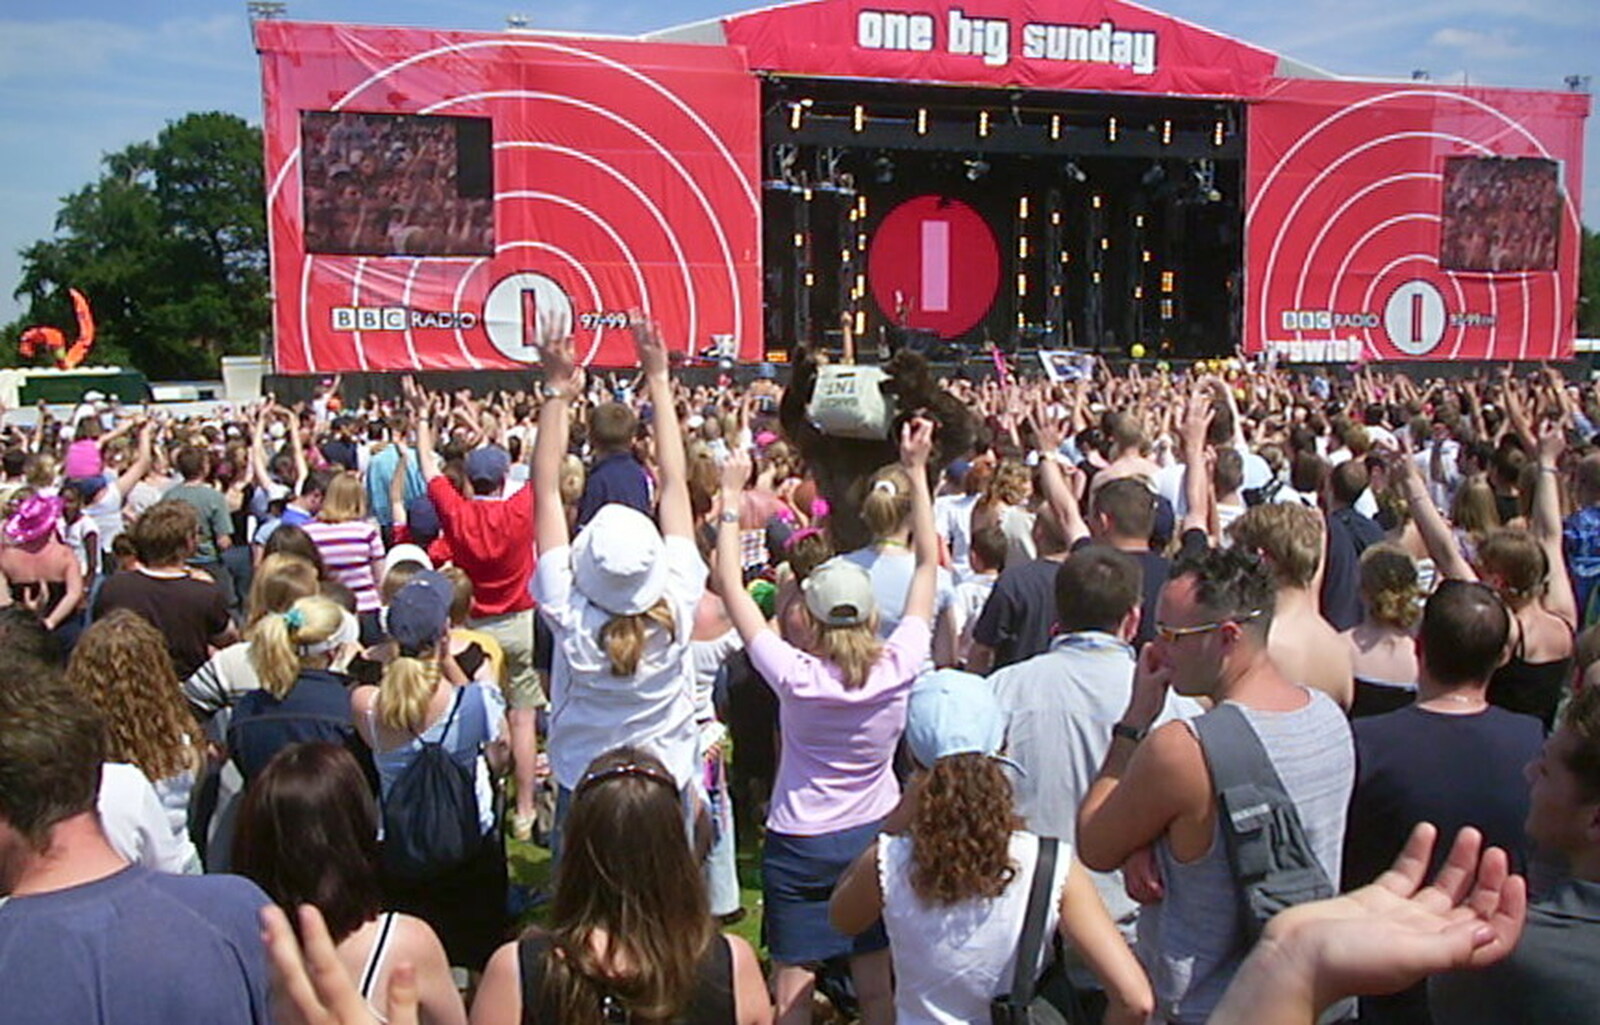 A hands-in-the-air moment from Radio 1's One Big Sunday, Chantry Park, Ipswich - 14th July 2002